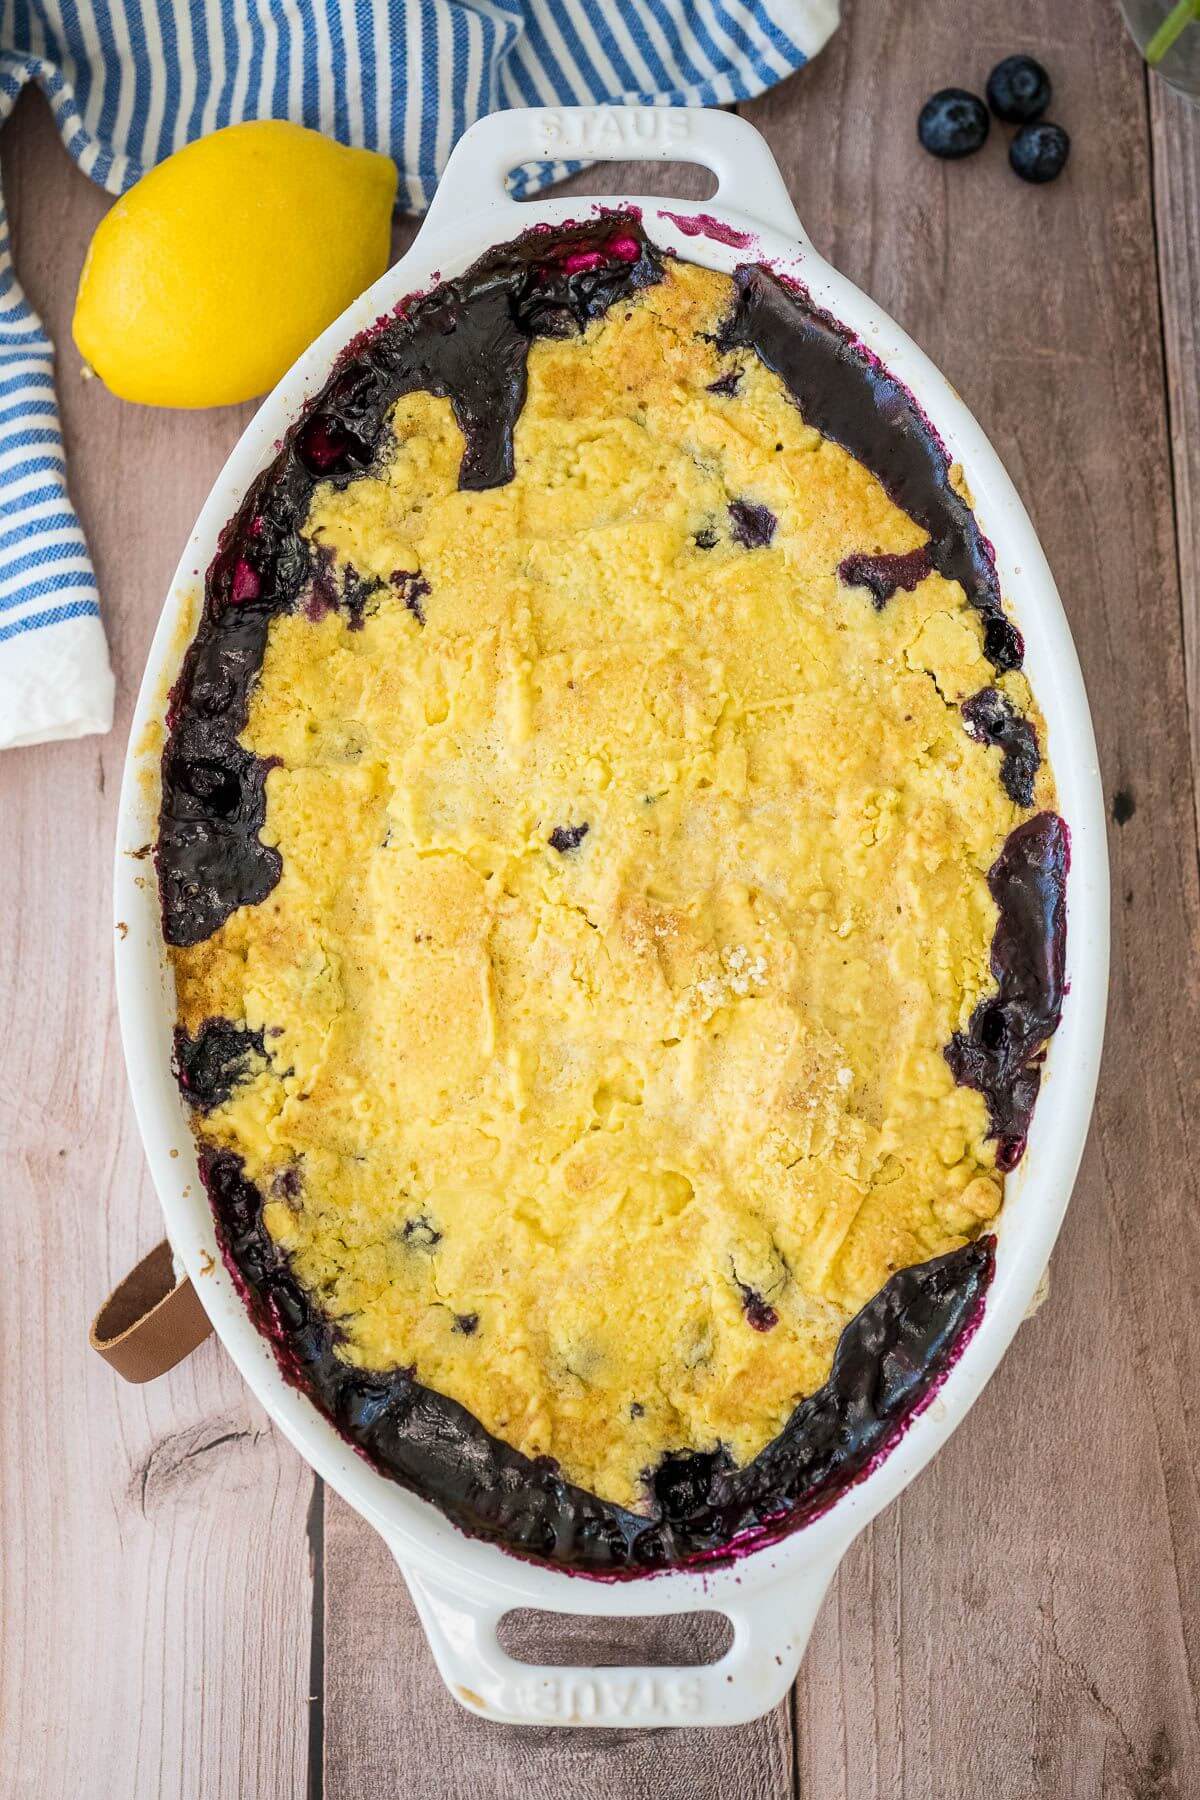 A full baking dish has a baked cake layer over purple cooked blueberries.